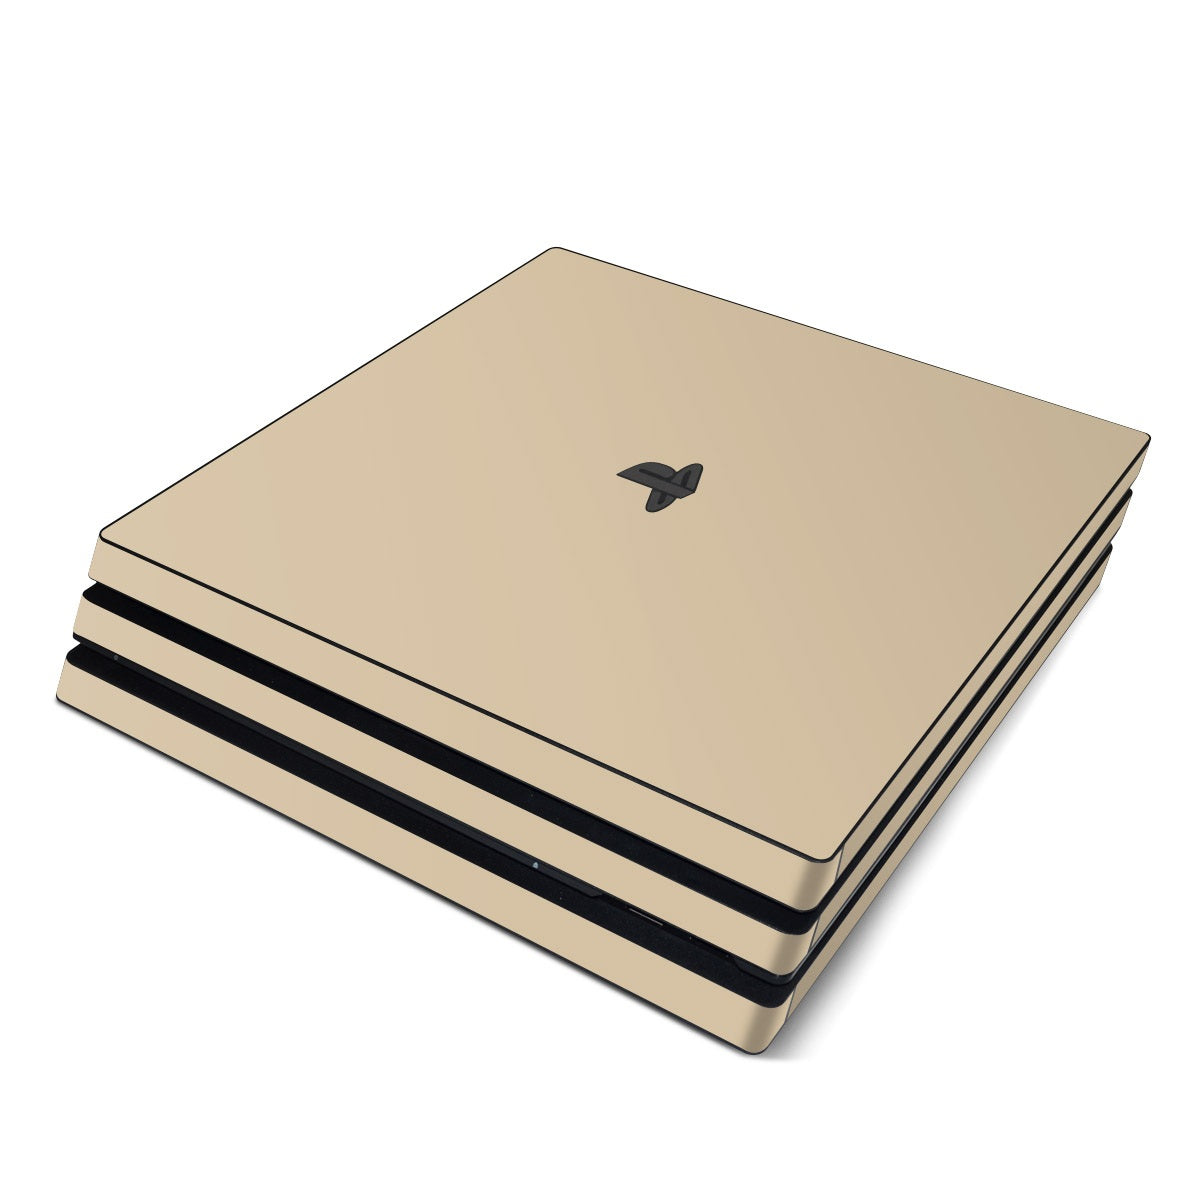 Solid State Beige - Sony PS4 Pro Skin